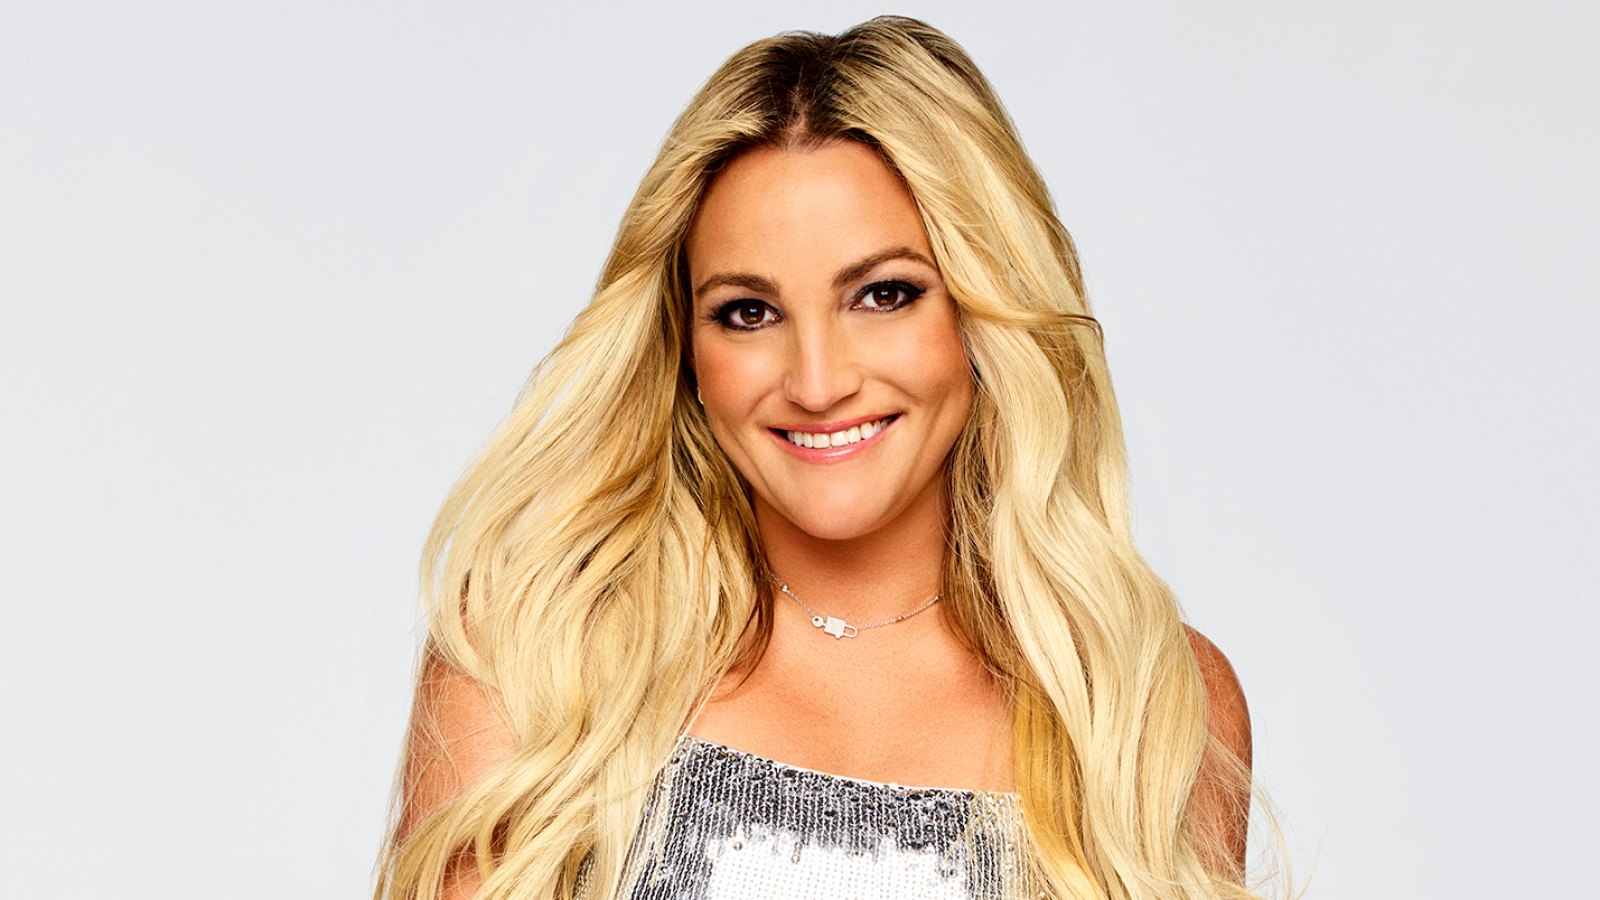 Jamie Lynn Spears Is Grateful for ‘Amazing Experience’ on ‘Dancing With the Stars’ Despite Elimination